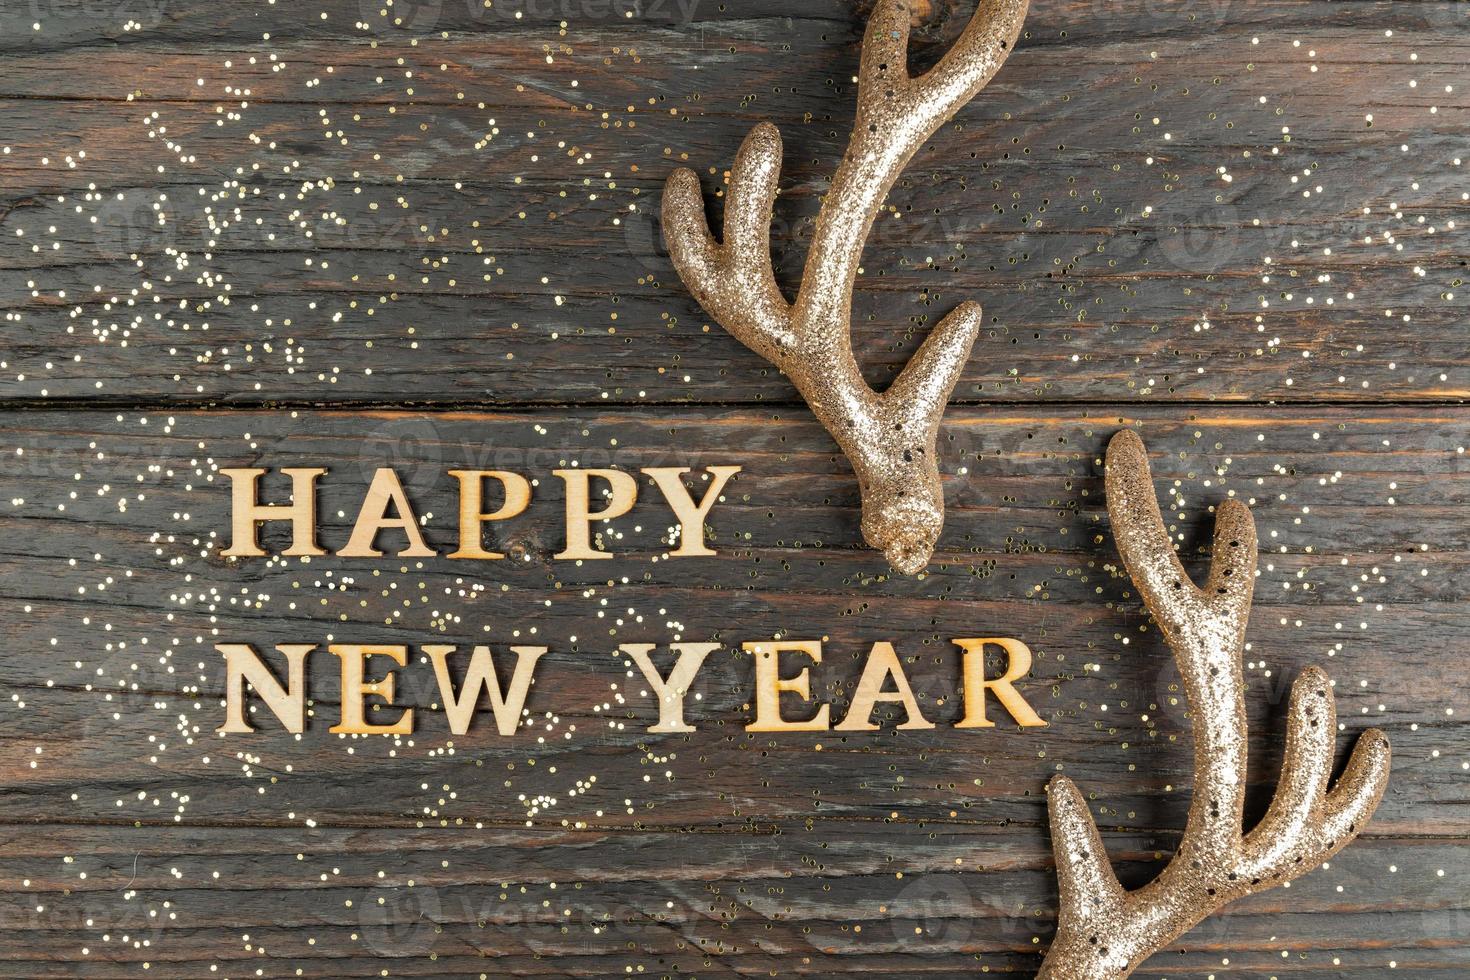 Happy new year greeting card with wooden text and golden raindeer horns. Festive background photo